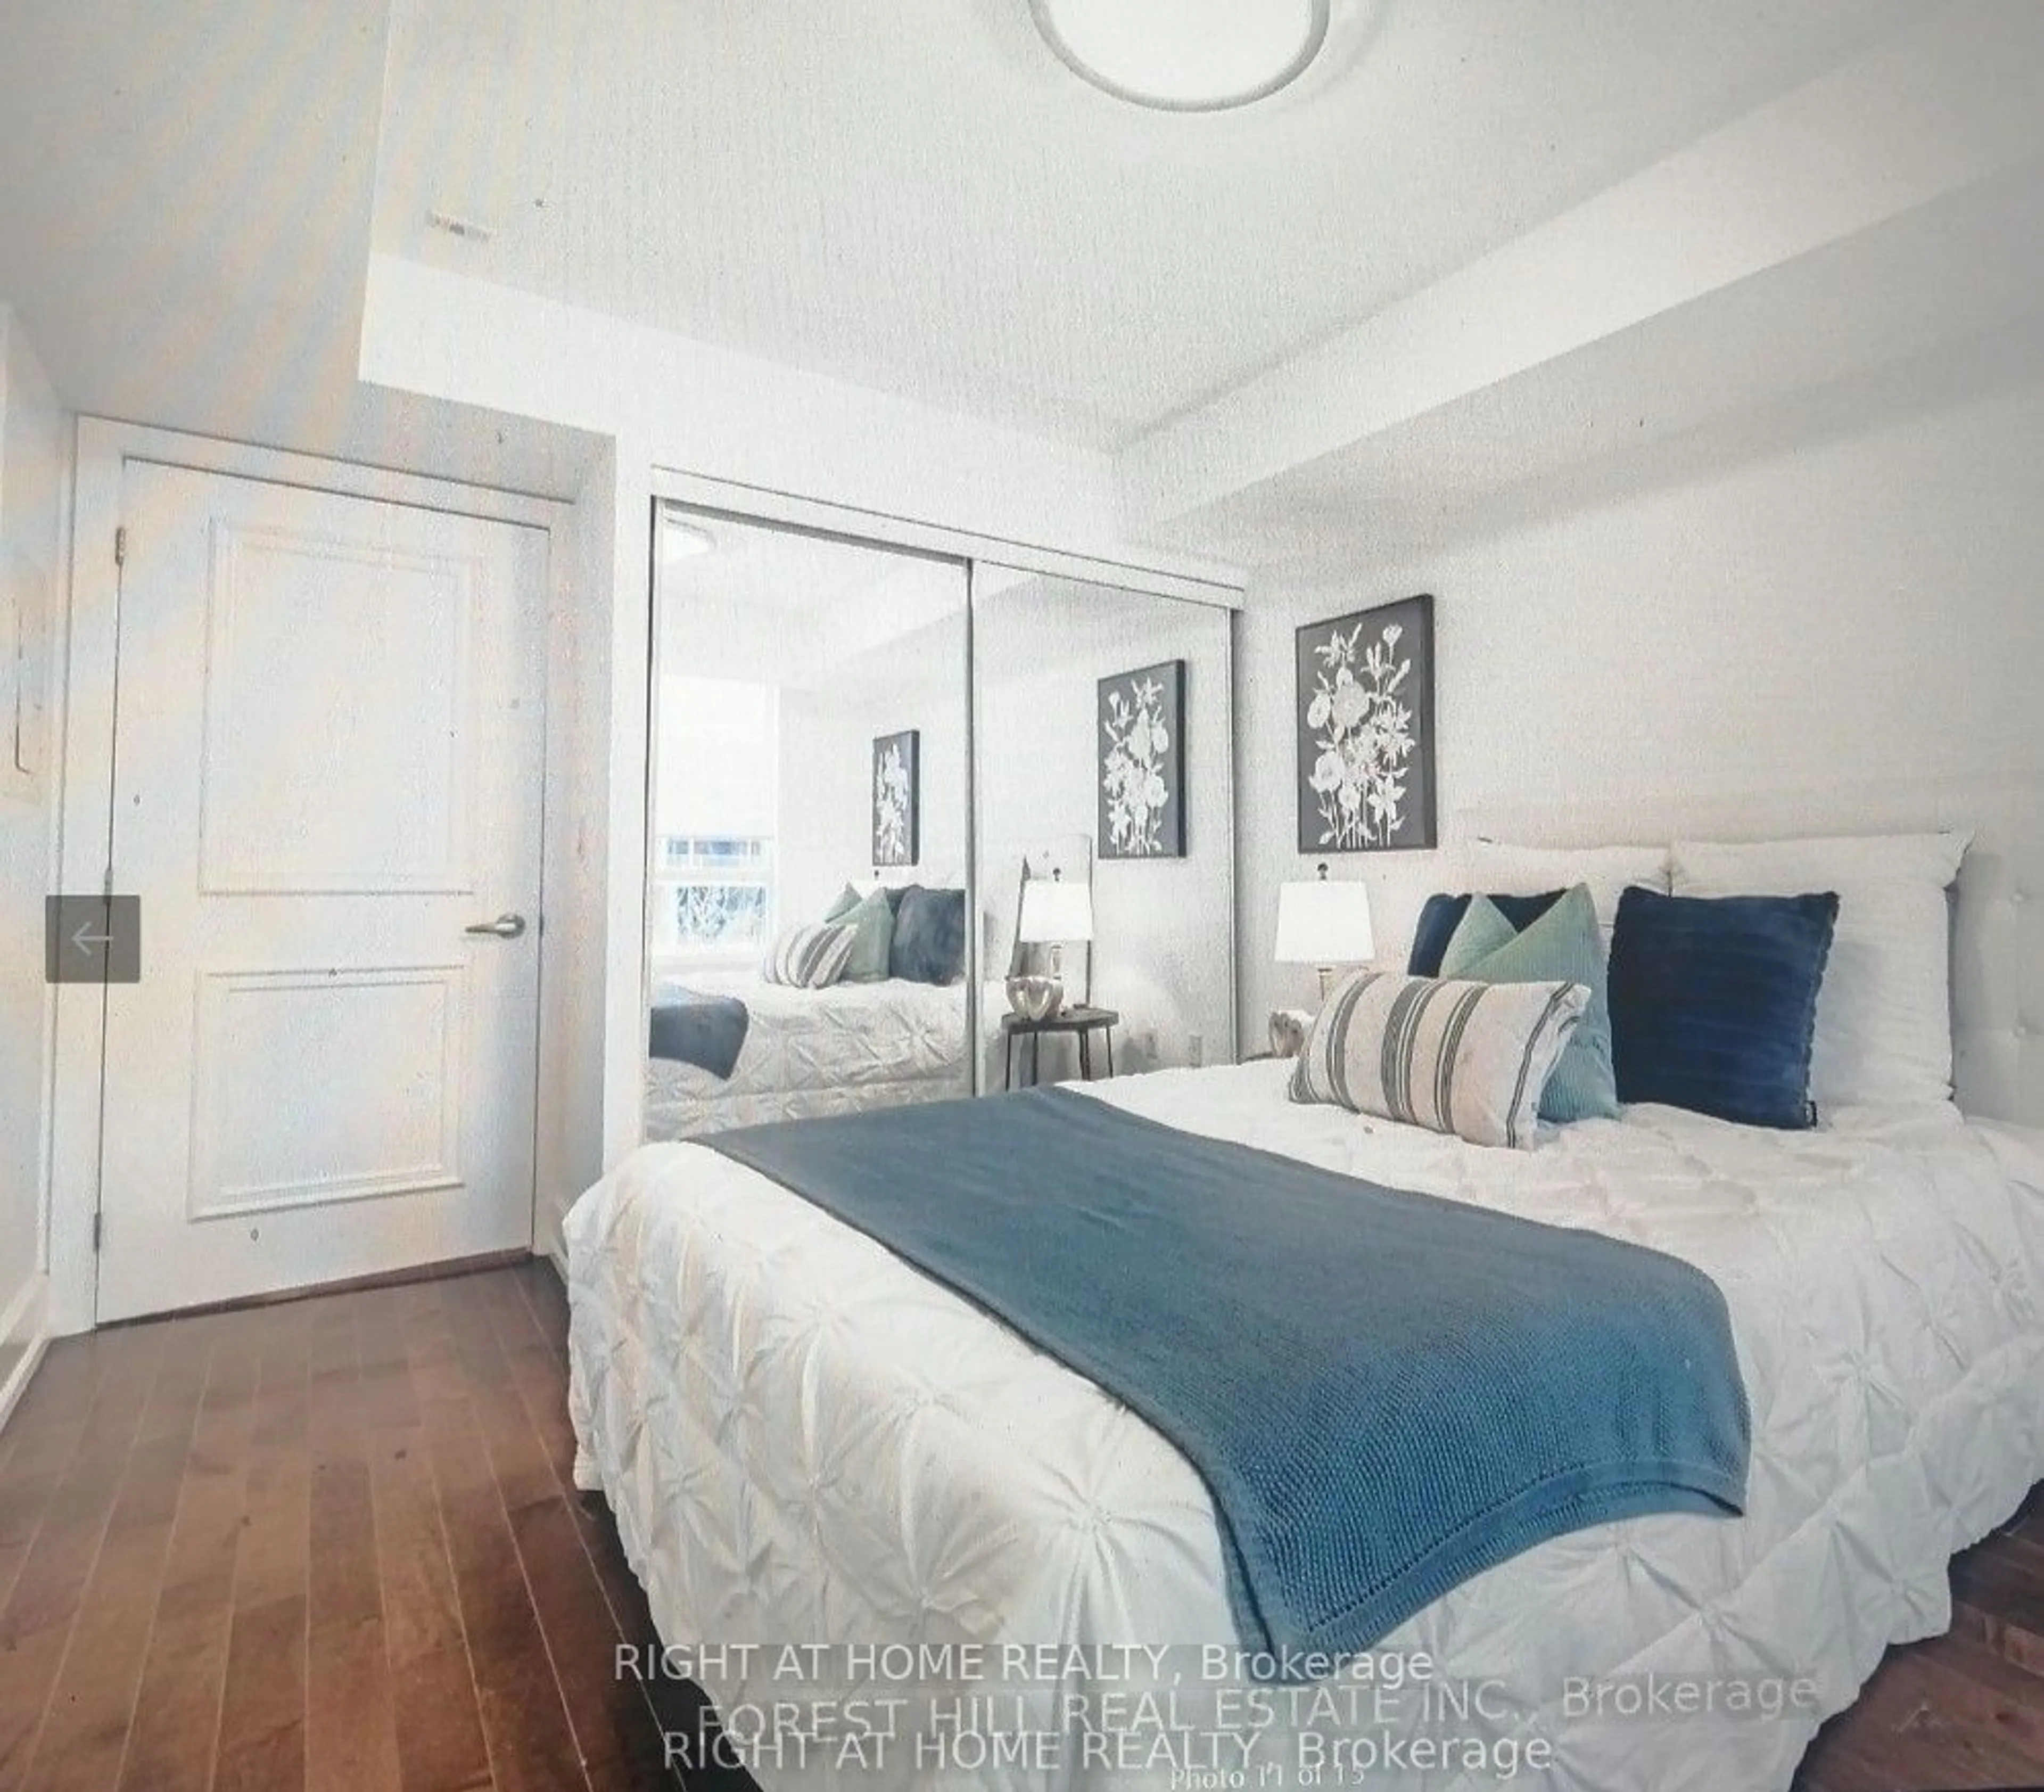 A pic of a room for 650 Sheppard Ave #614, Toronto Ontario M2K 3E4